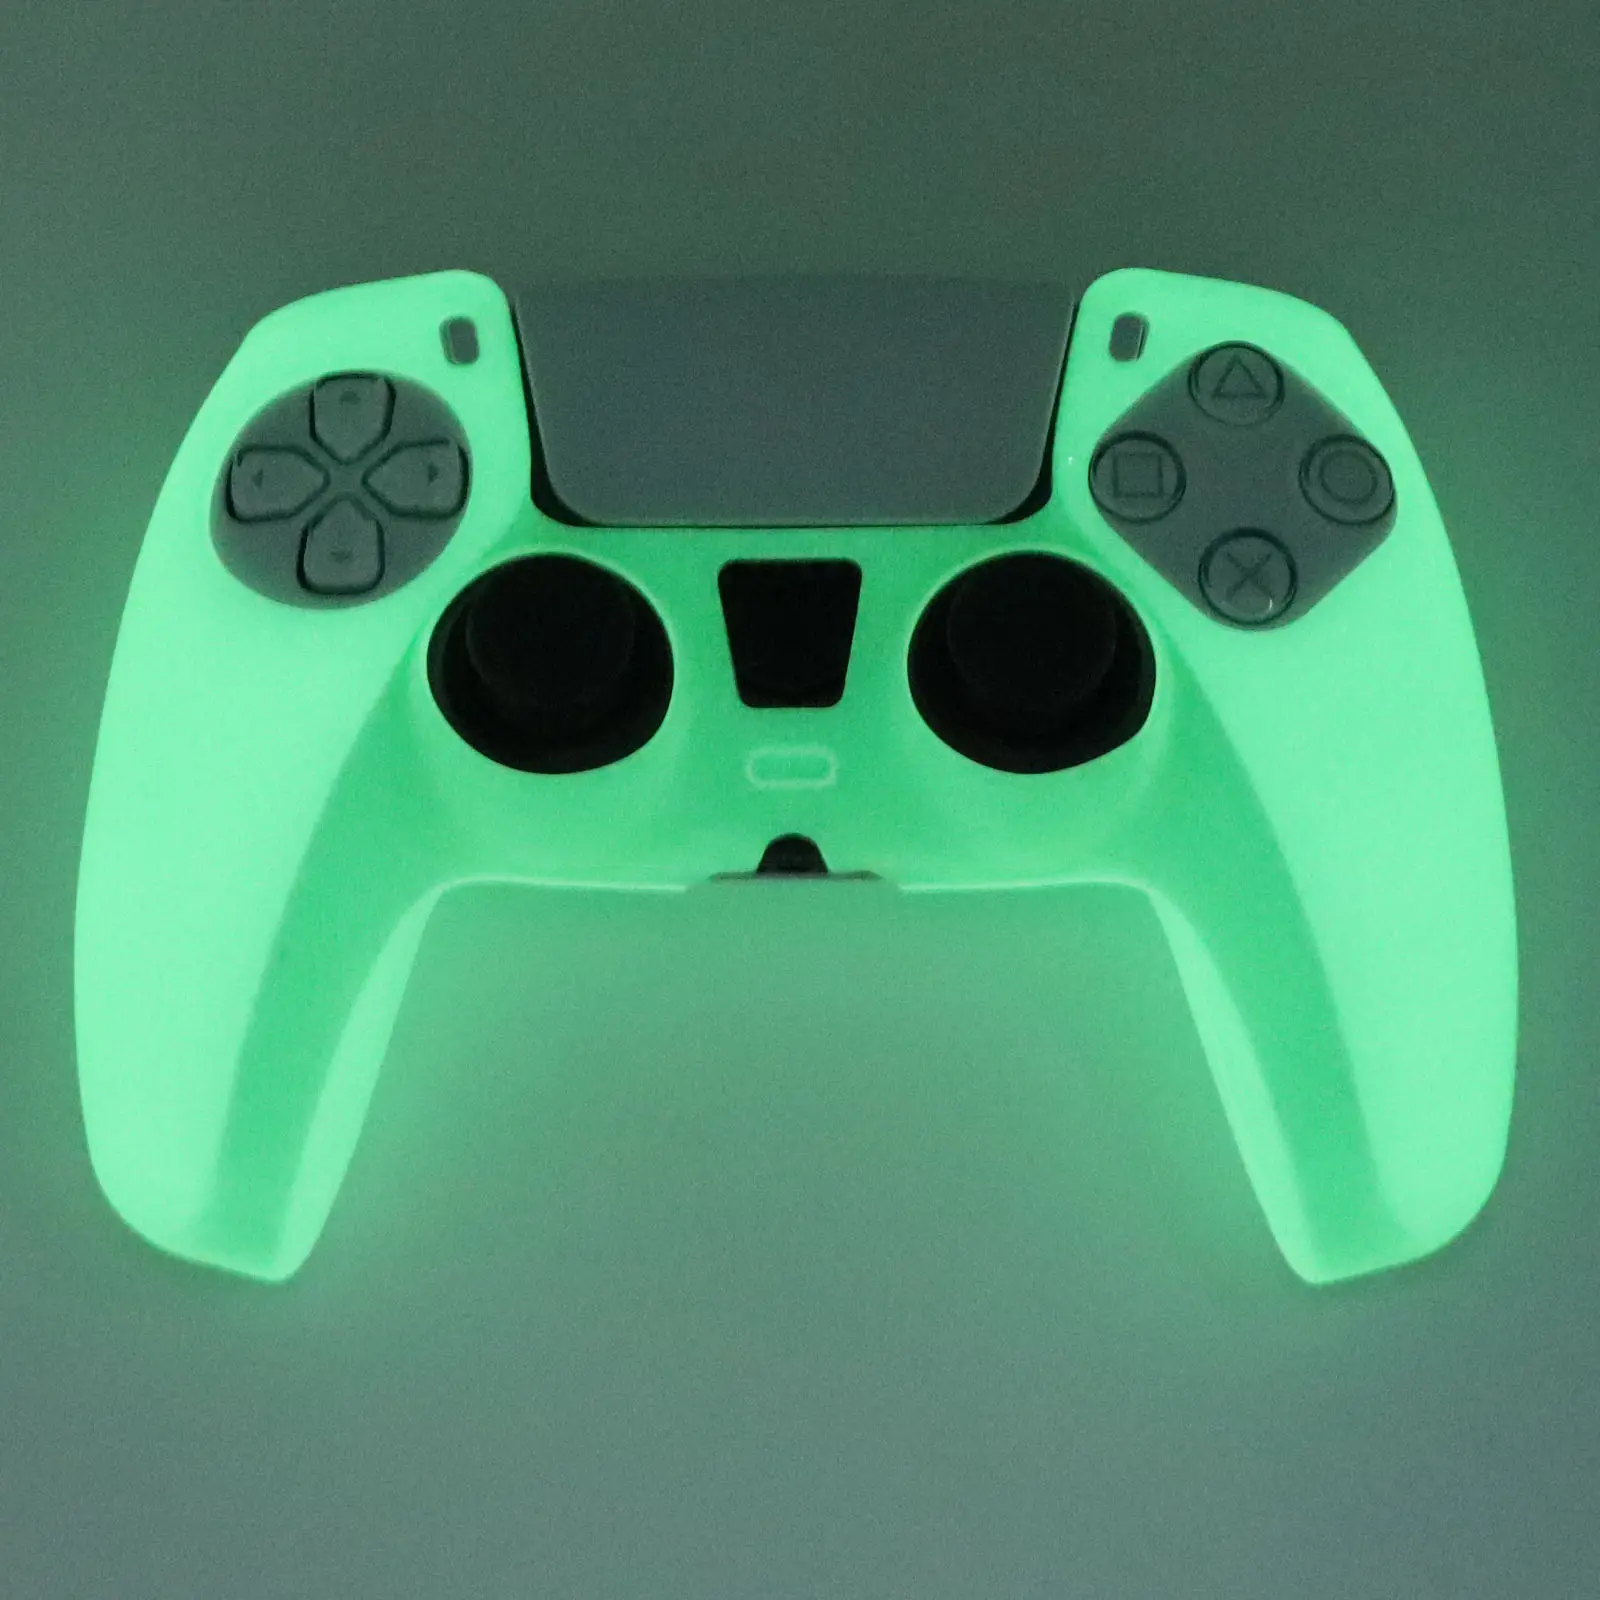 Glow In Dark Soft Siliconen Case Voor Playstation4 5 Controle Games Accessoires Gamepad Joystick Case Cover Voor P4 Ps5 Controller